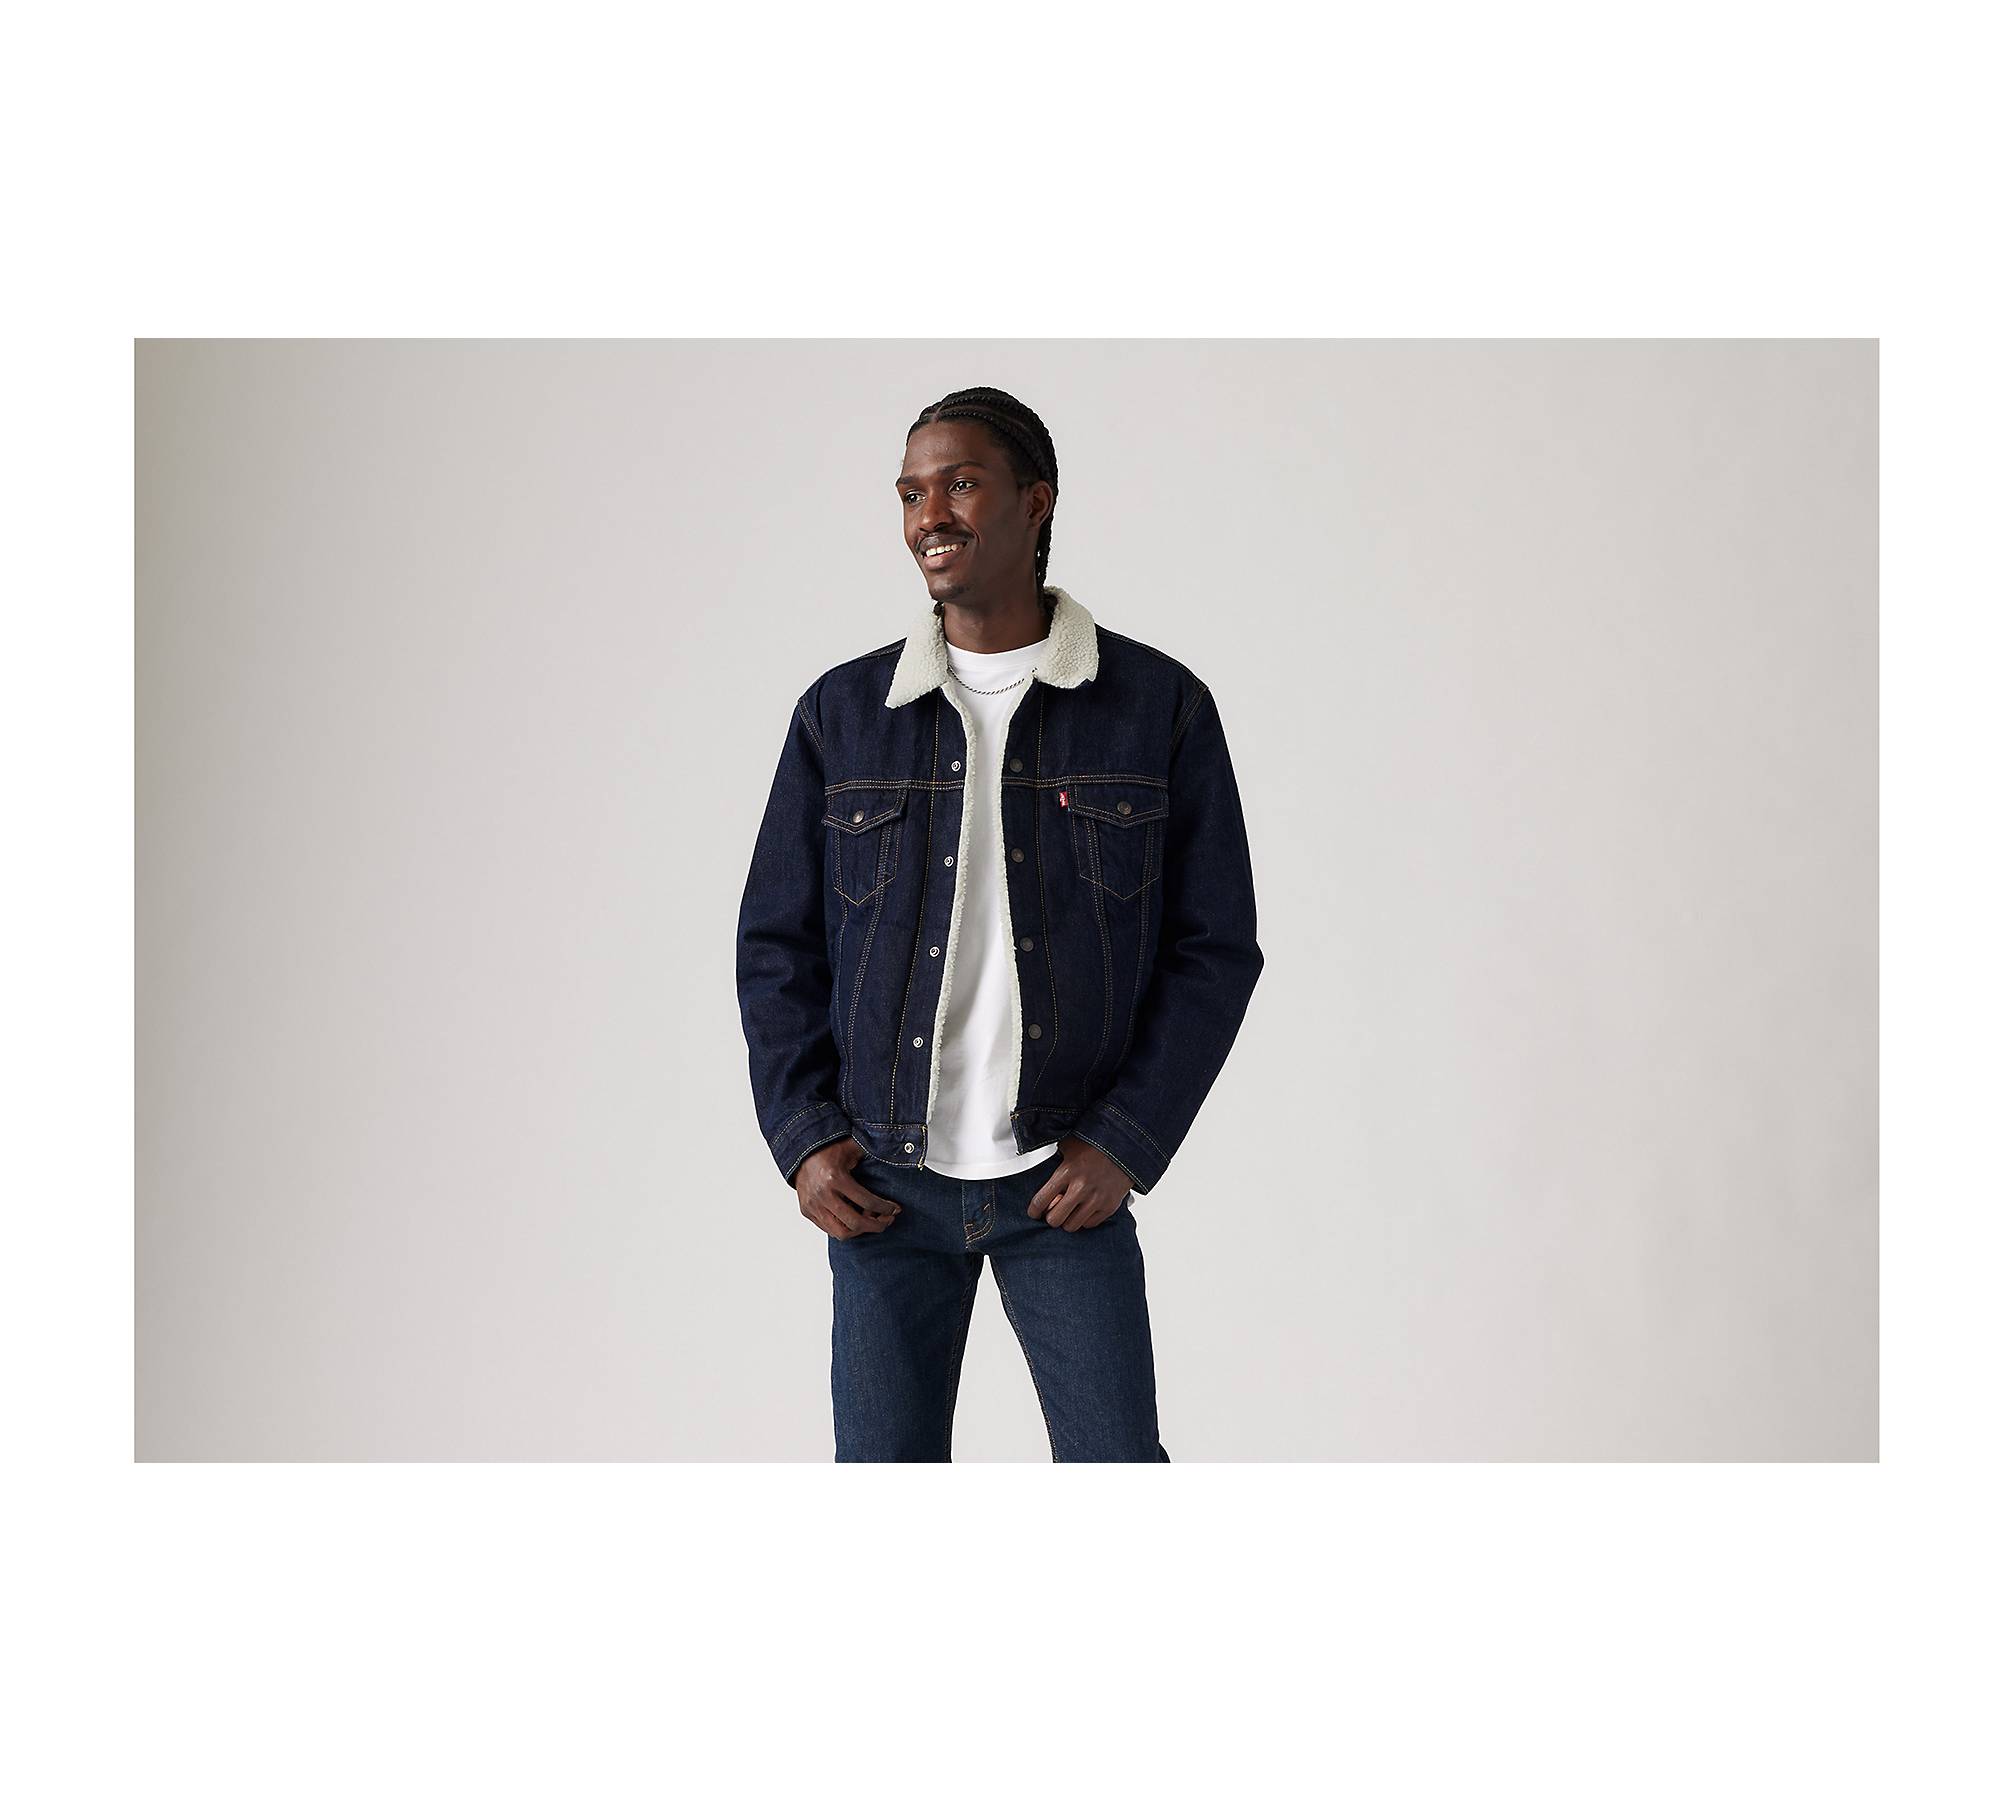 Levi's type 3 sherpa lined denim jacket in fable mid wash